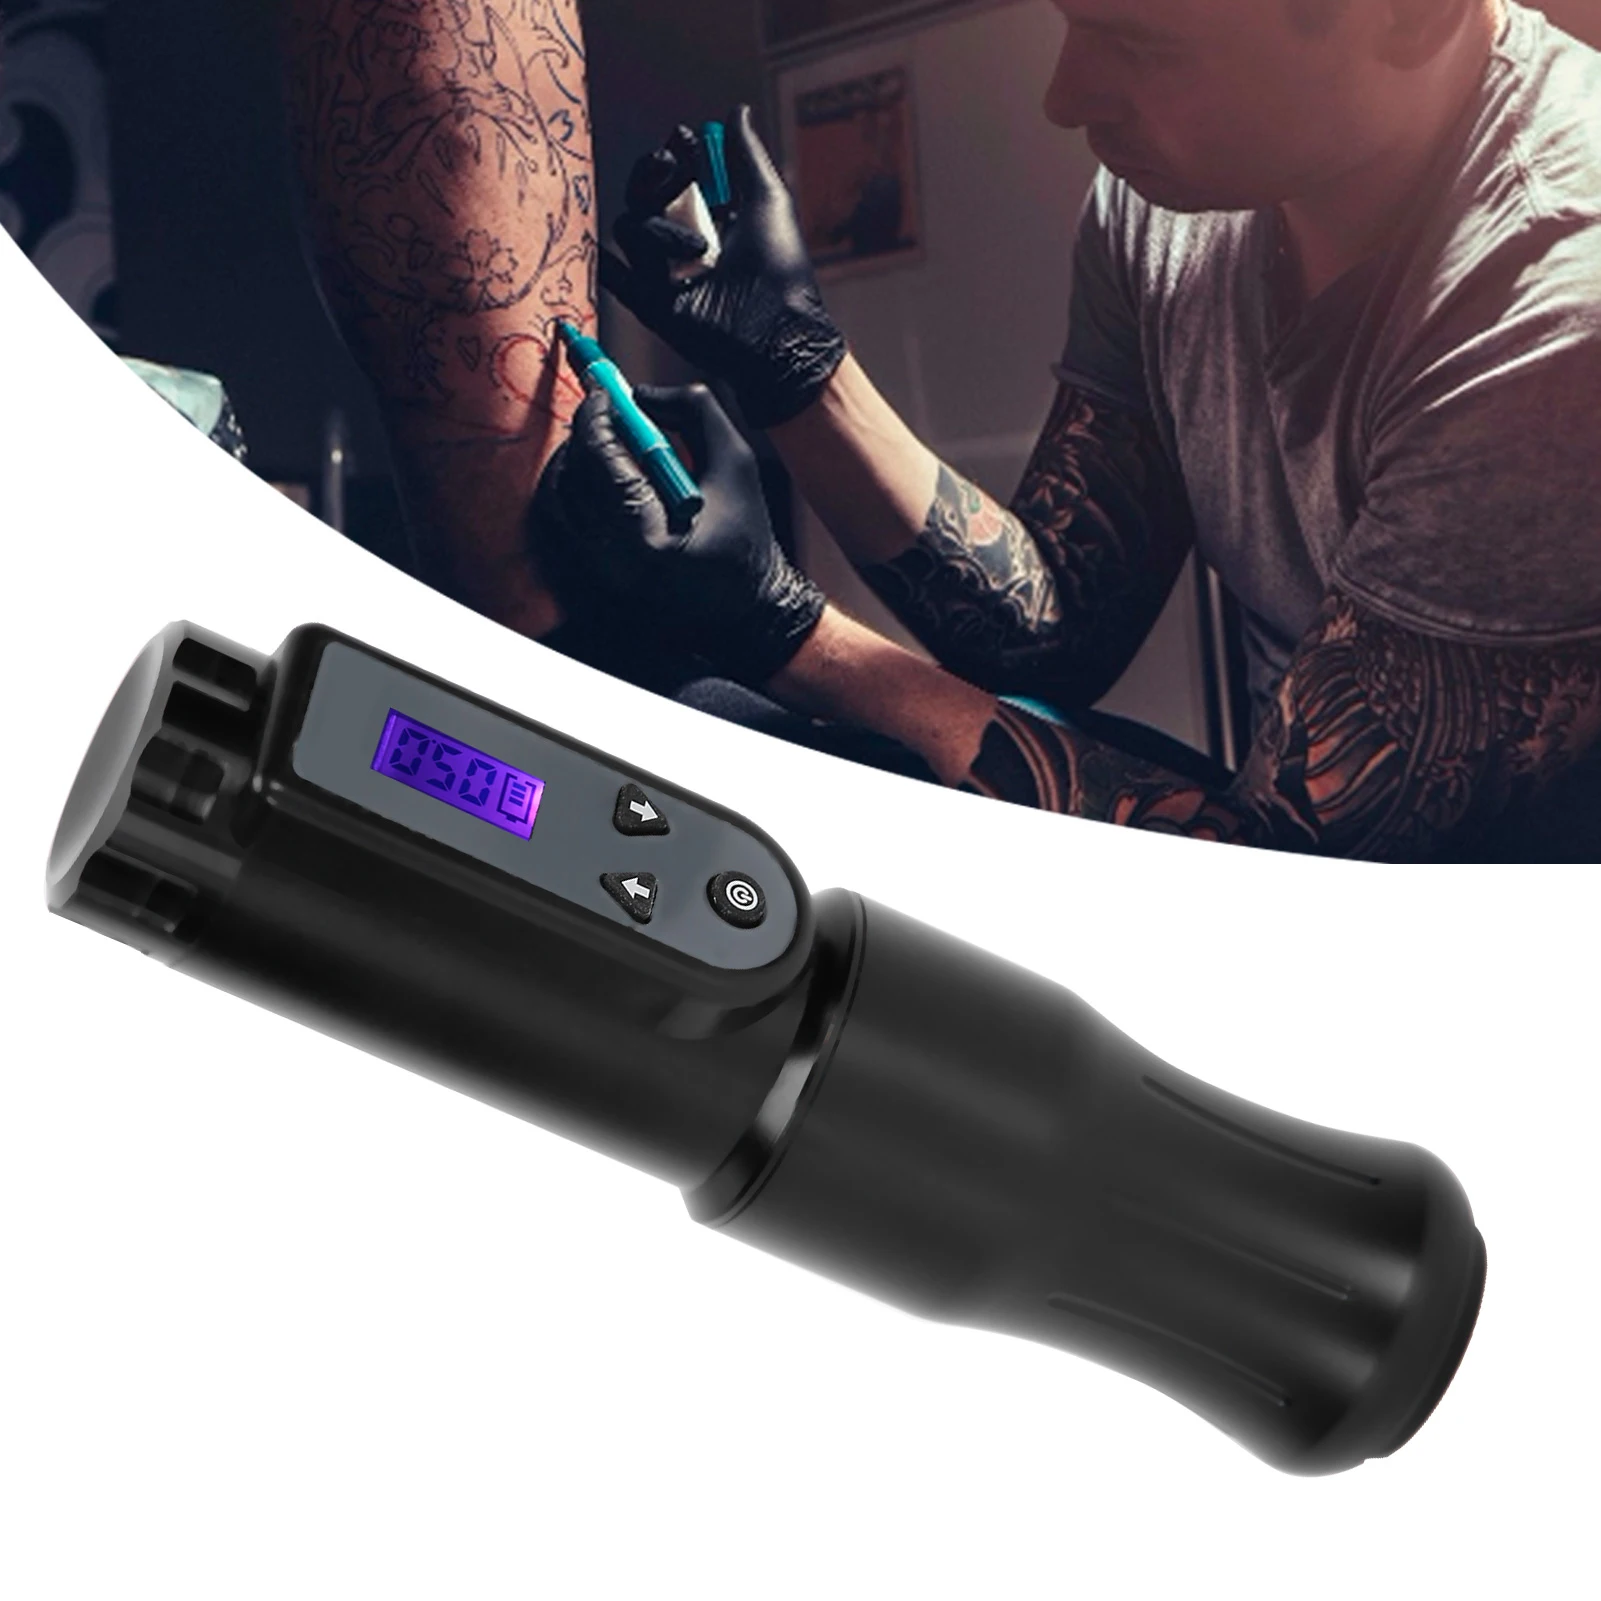 A Set Portable LCD Display Screen Wireless Tattoo Pen Strong Motor Tattoo Accessory Fogging All-In-One Machine Tattoos Equipment